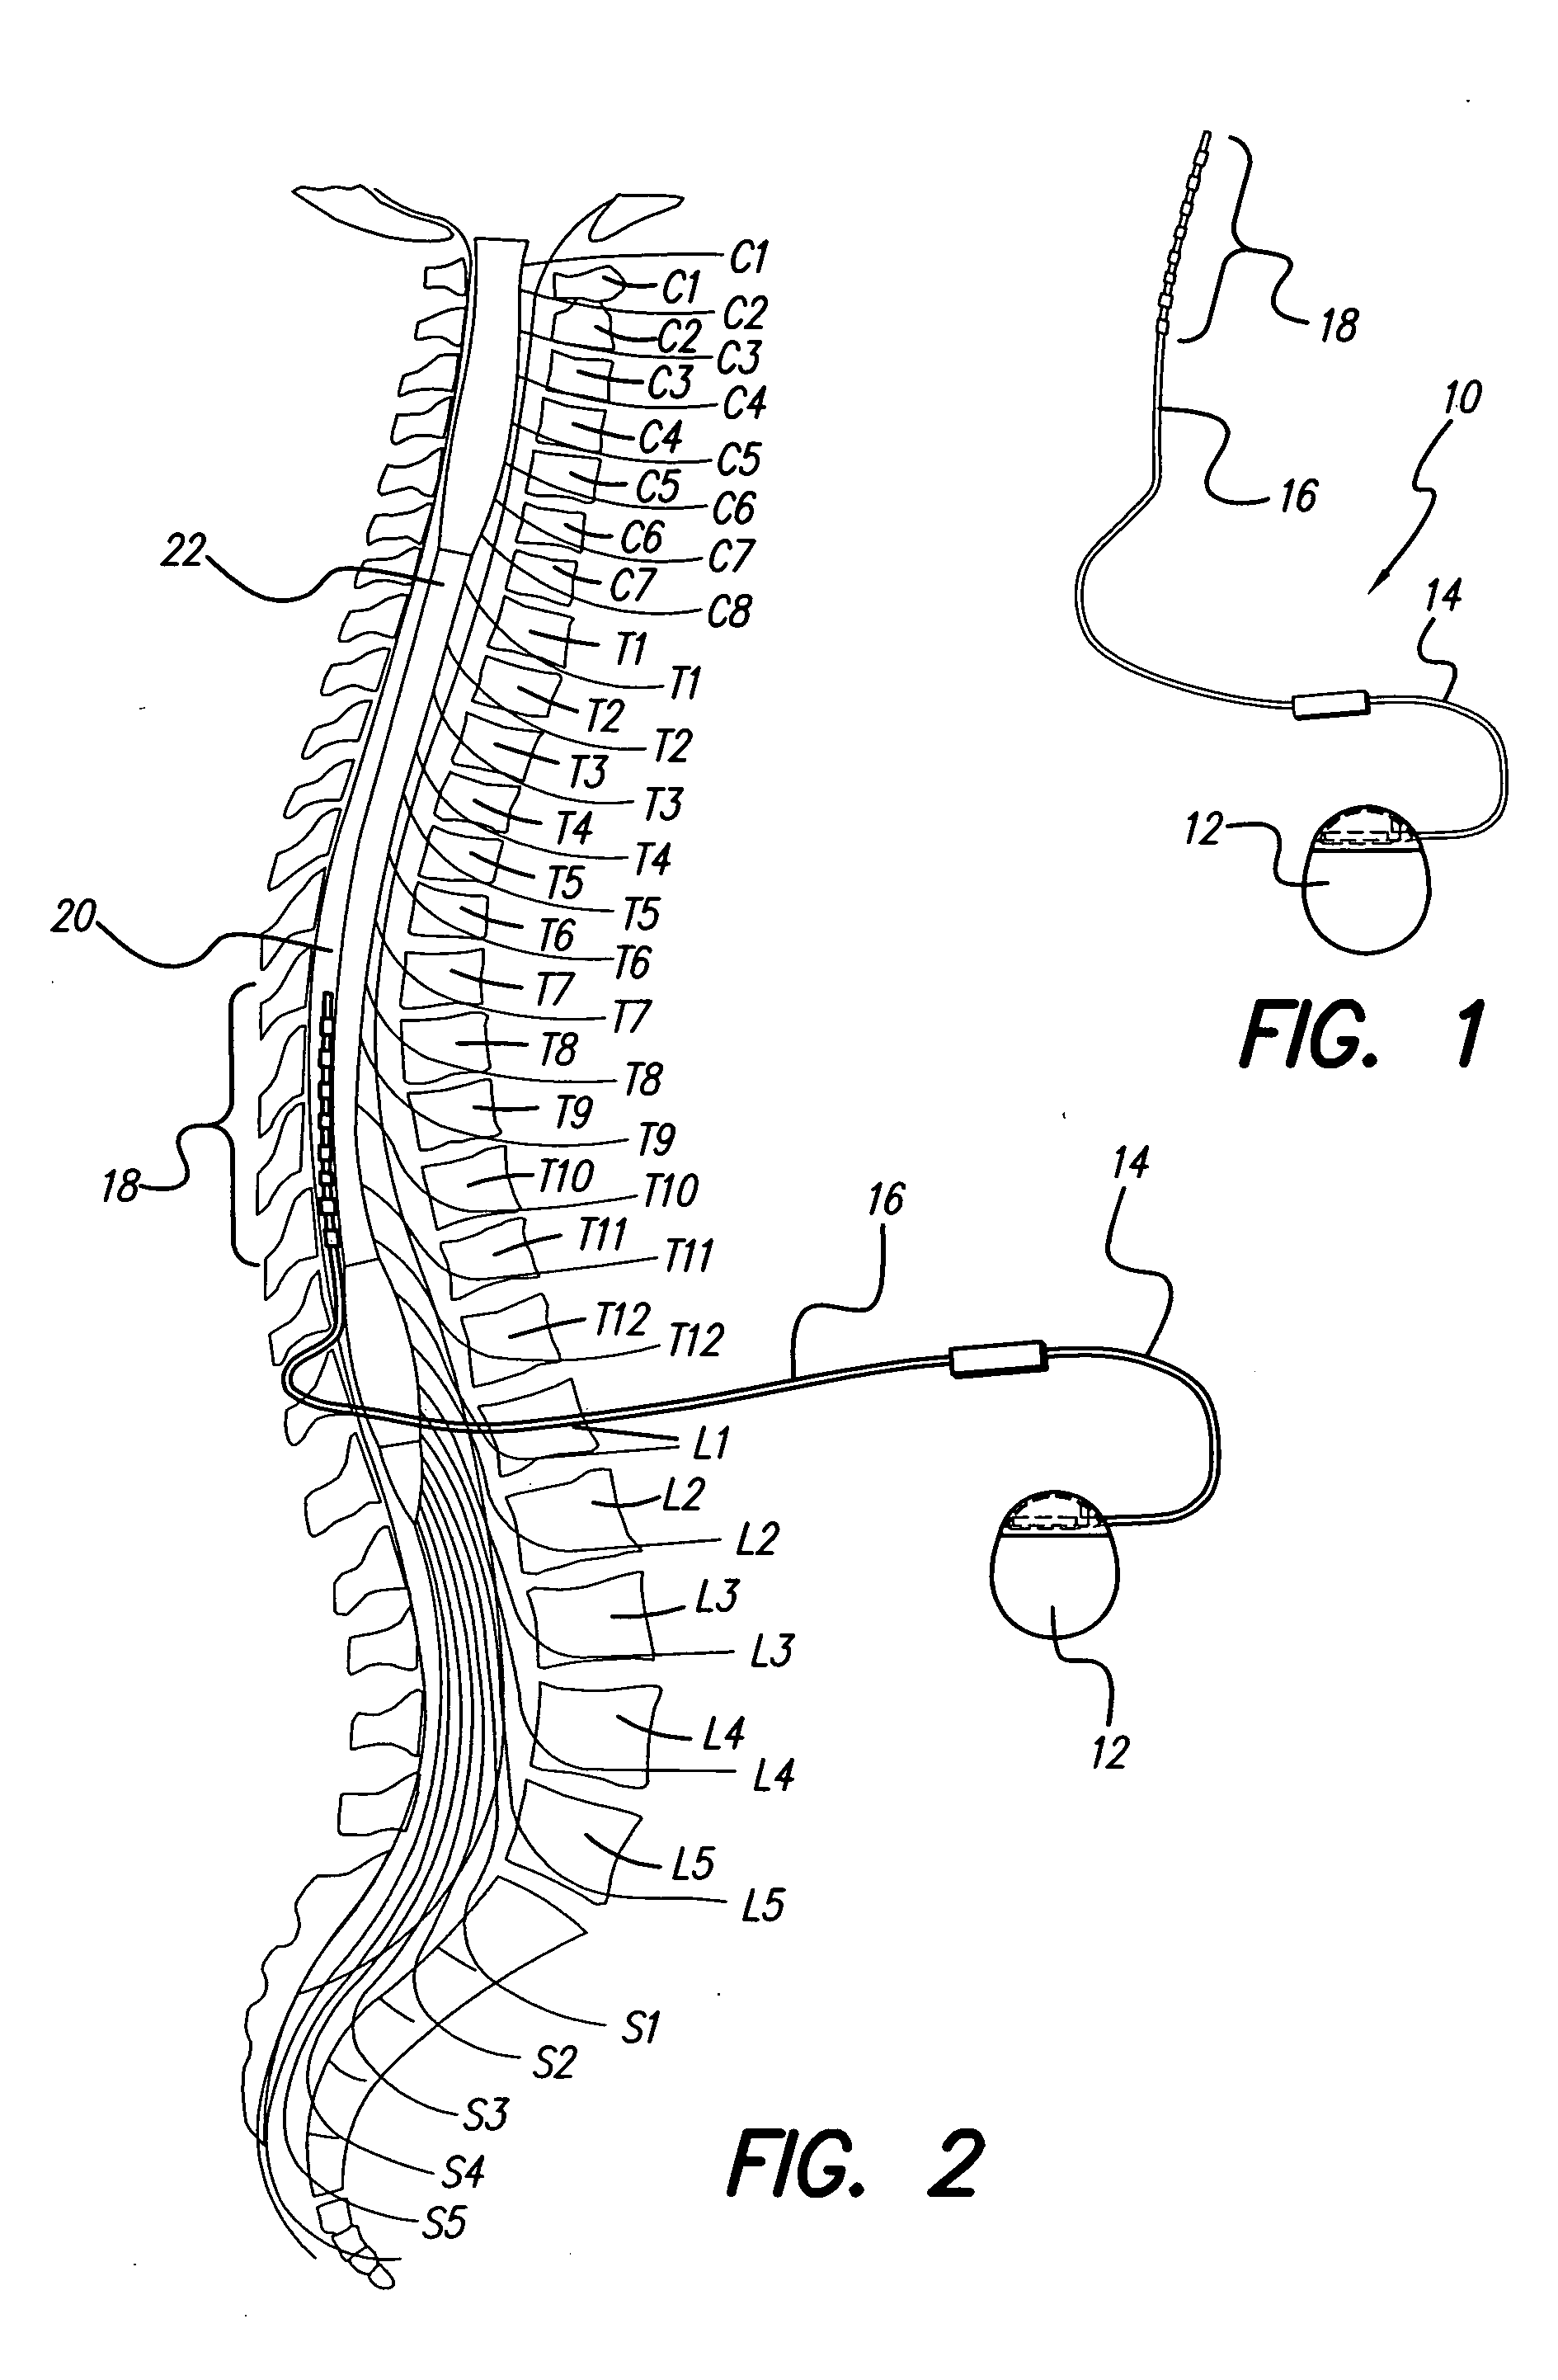 Method for programming implantable device